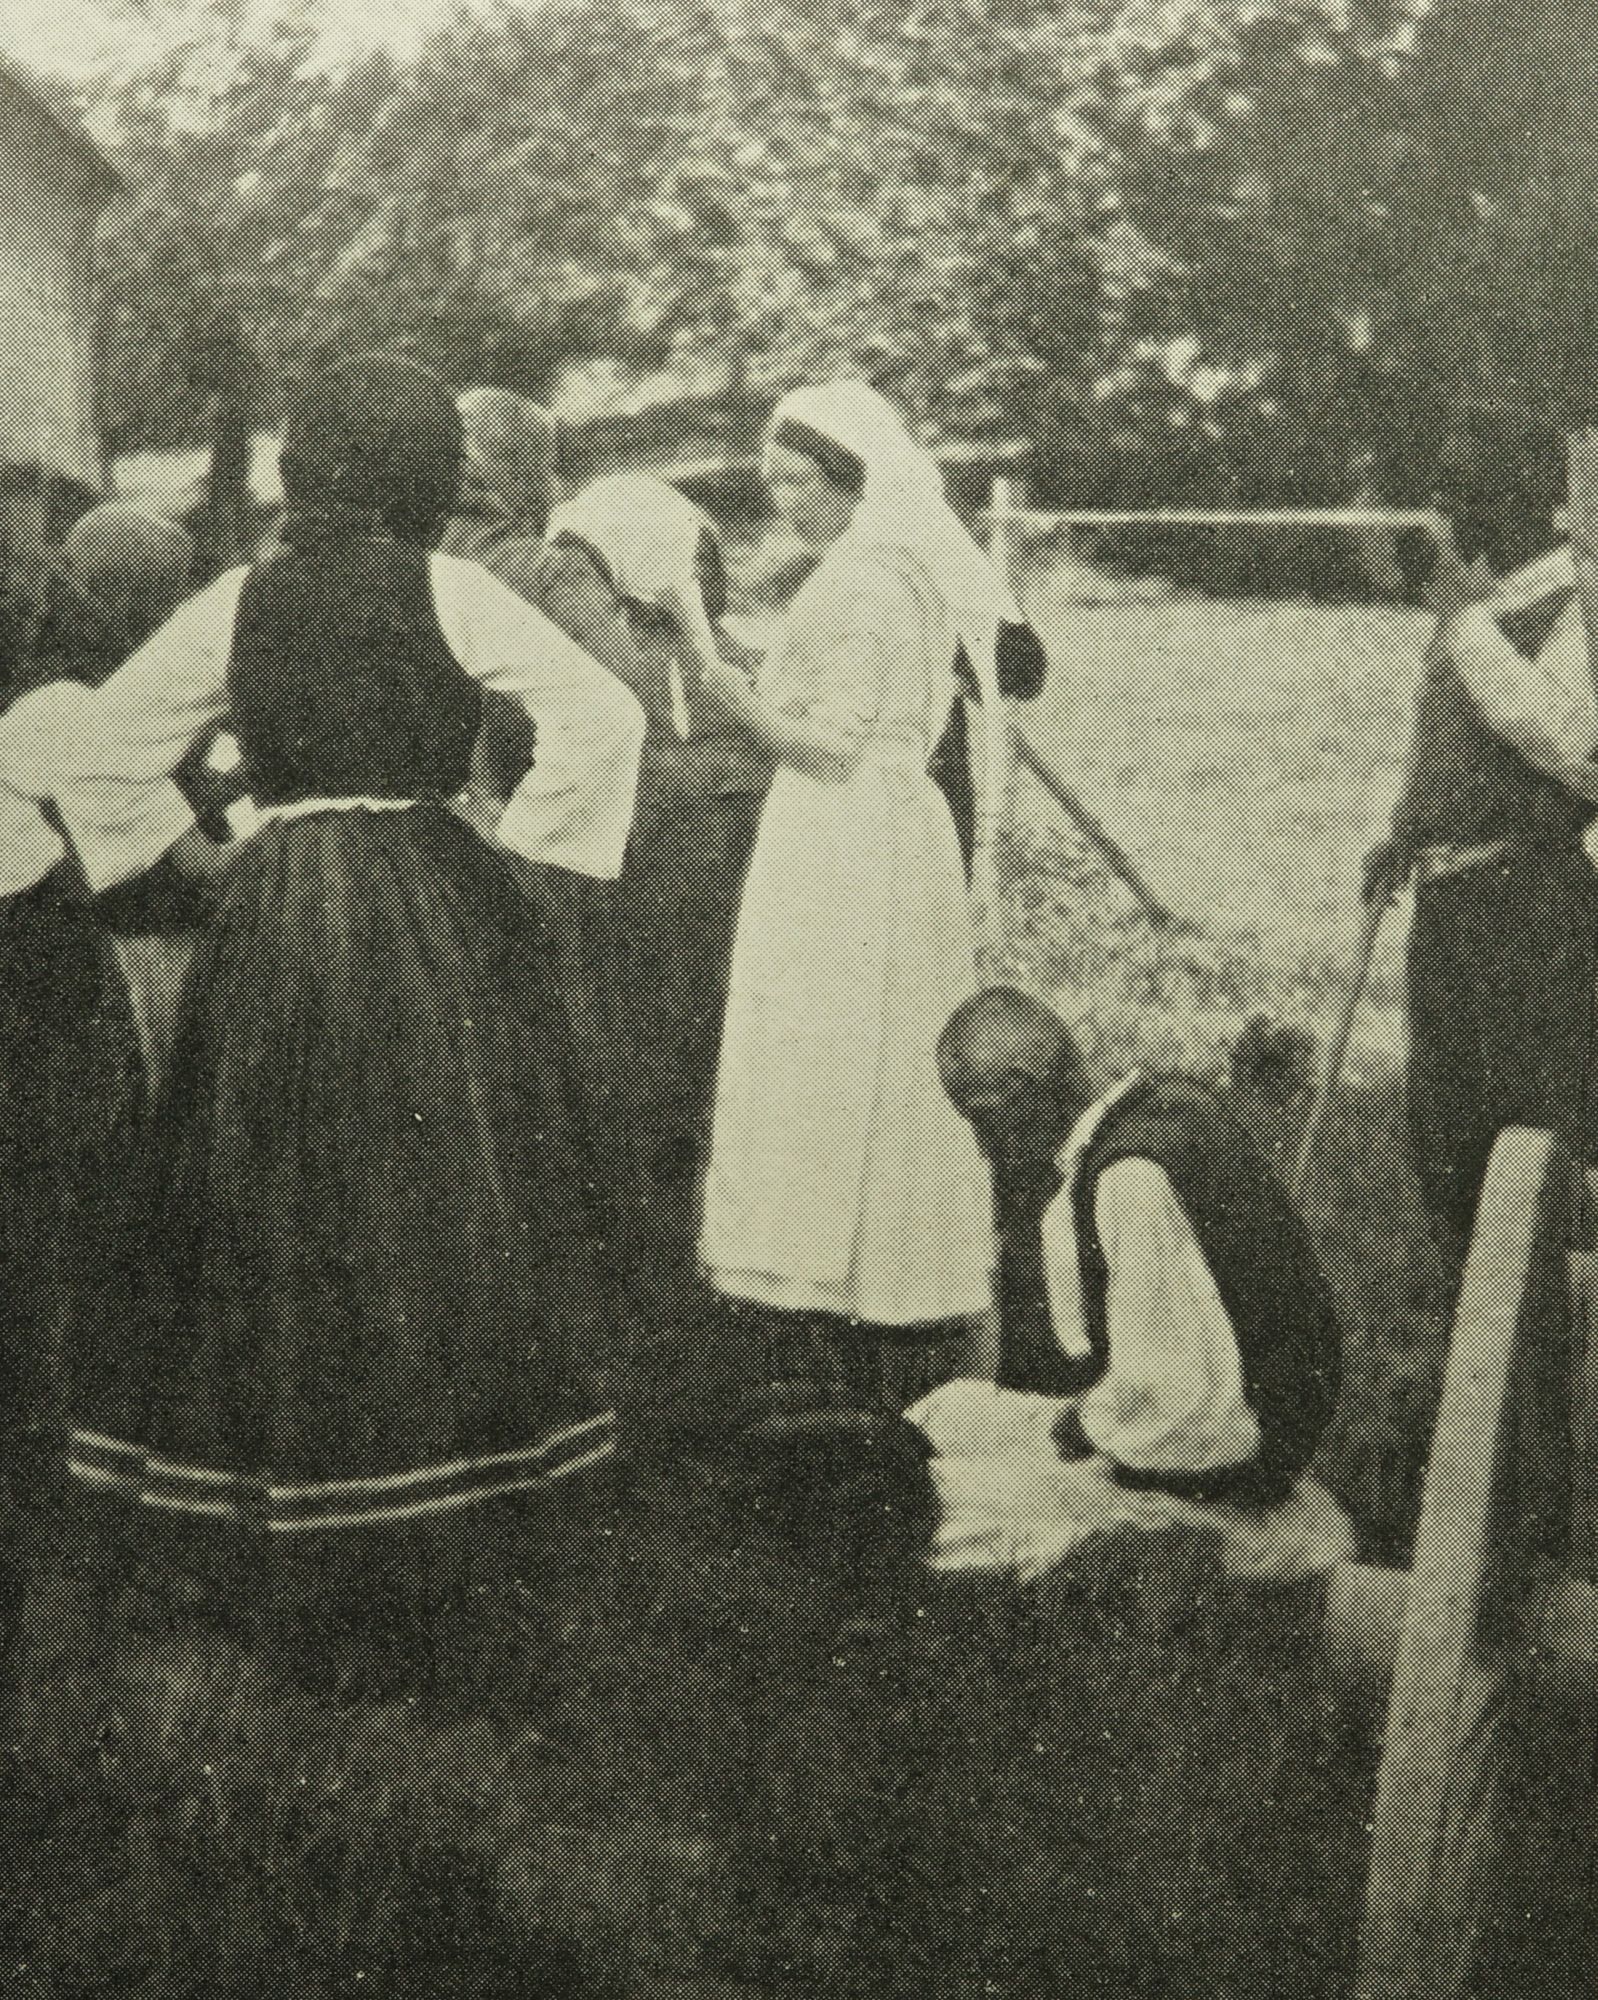 Out patients Serbia 1915, from The Luck of Thirteen.